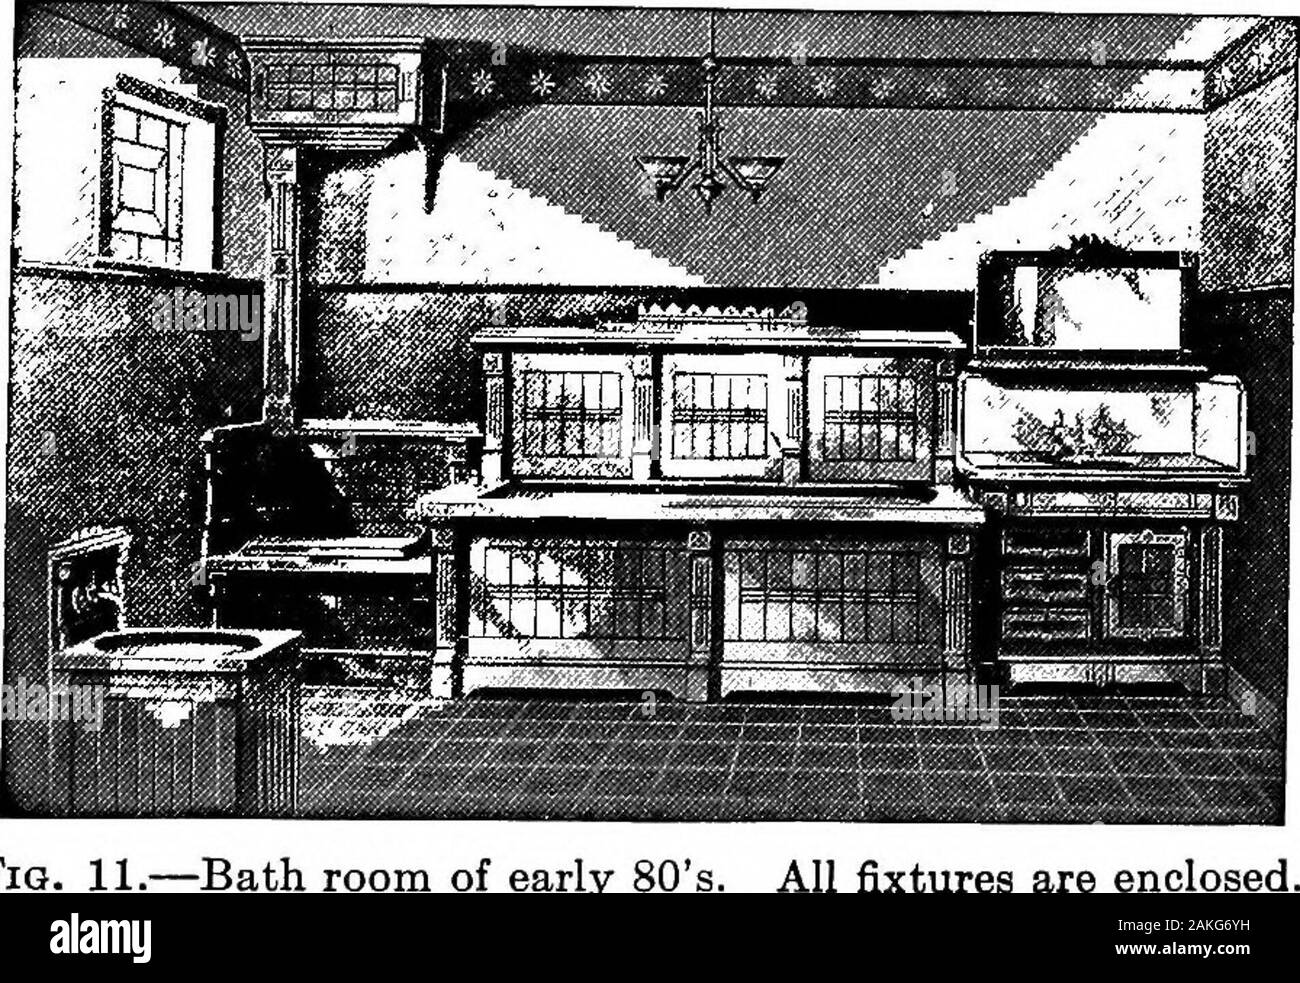 Elements of plumbing . Fig. 10.. FlQ ?Bath room of early 80s. All fixtures are enclosed. The development of the urinal, showers, wash trays,drinking fountains and other fixtures I will not attempt tocover. As the demand has been evident for fixtures ofcertain tj^jes, the plumber has been alert to anticipate and 10 ELEMENTS OF PLUMBING supply it. There is need, however, for improvement inall our fixtures, especially that part which connects with thewaste pipes, also the hanging, that is the arrangement orlack of arrangement for hanging fixtures to the wall. Thewaste and overflow of all fixtures Stock Photo